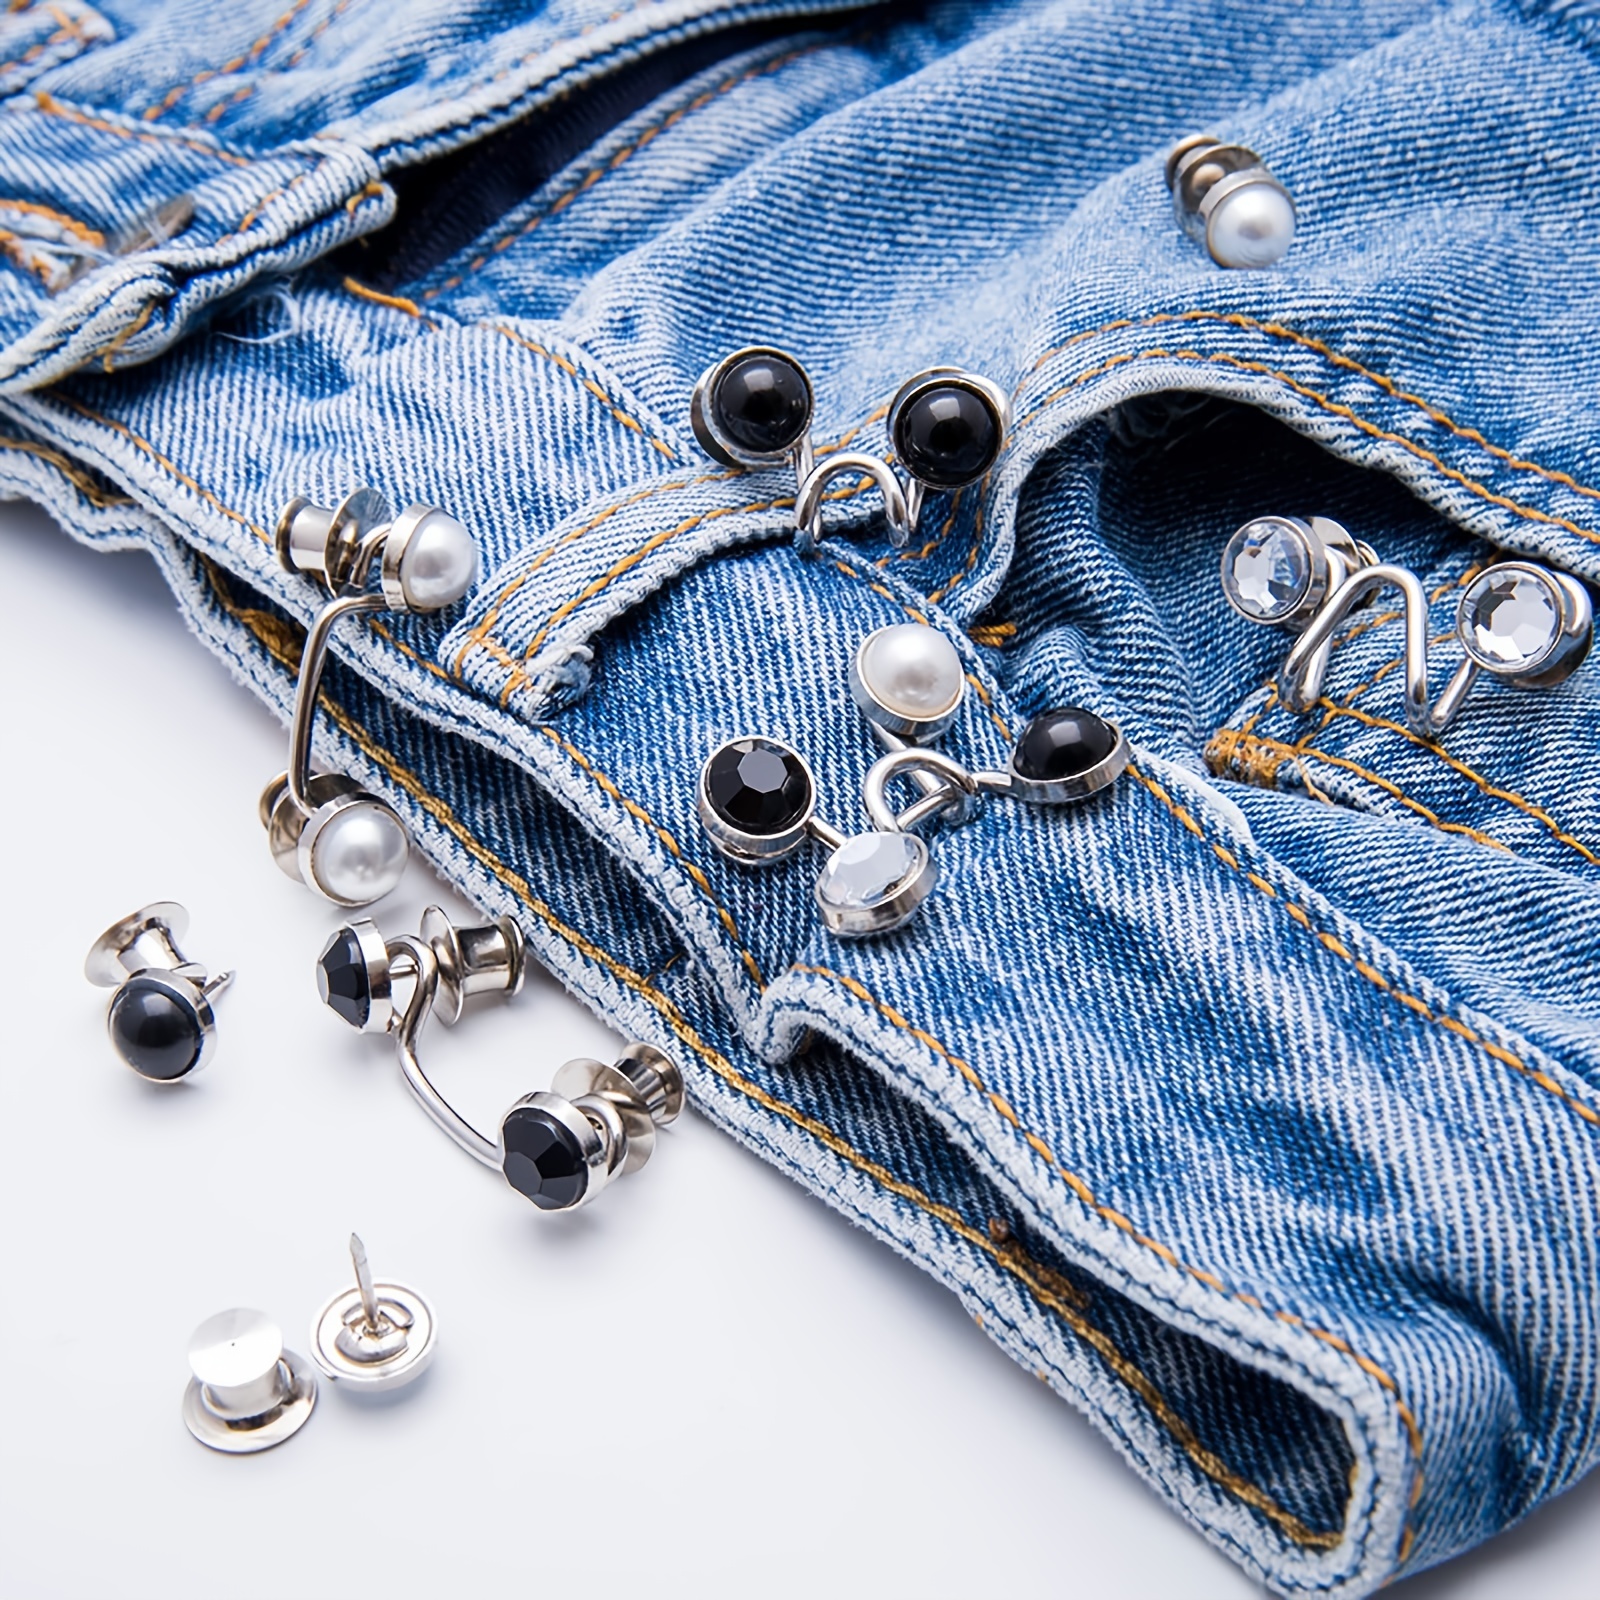 Buy Detachable Buttons for Jeans,2 Sets Adjustable Waist Buckle Extender  for Jeans Waist Tightener Instant Jean Buttons for Loose Jeans Pants Dress,  No Sewing Required Detachable Jean Pin - Lowest price in